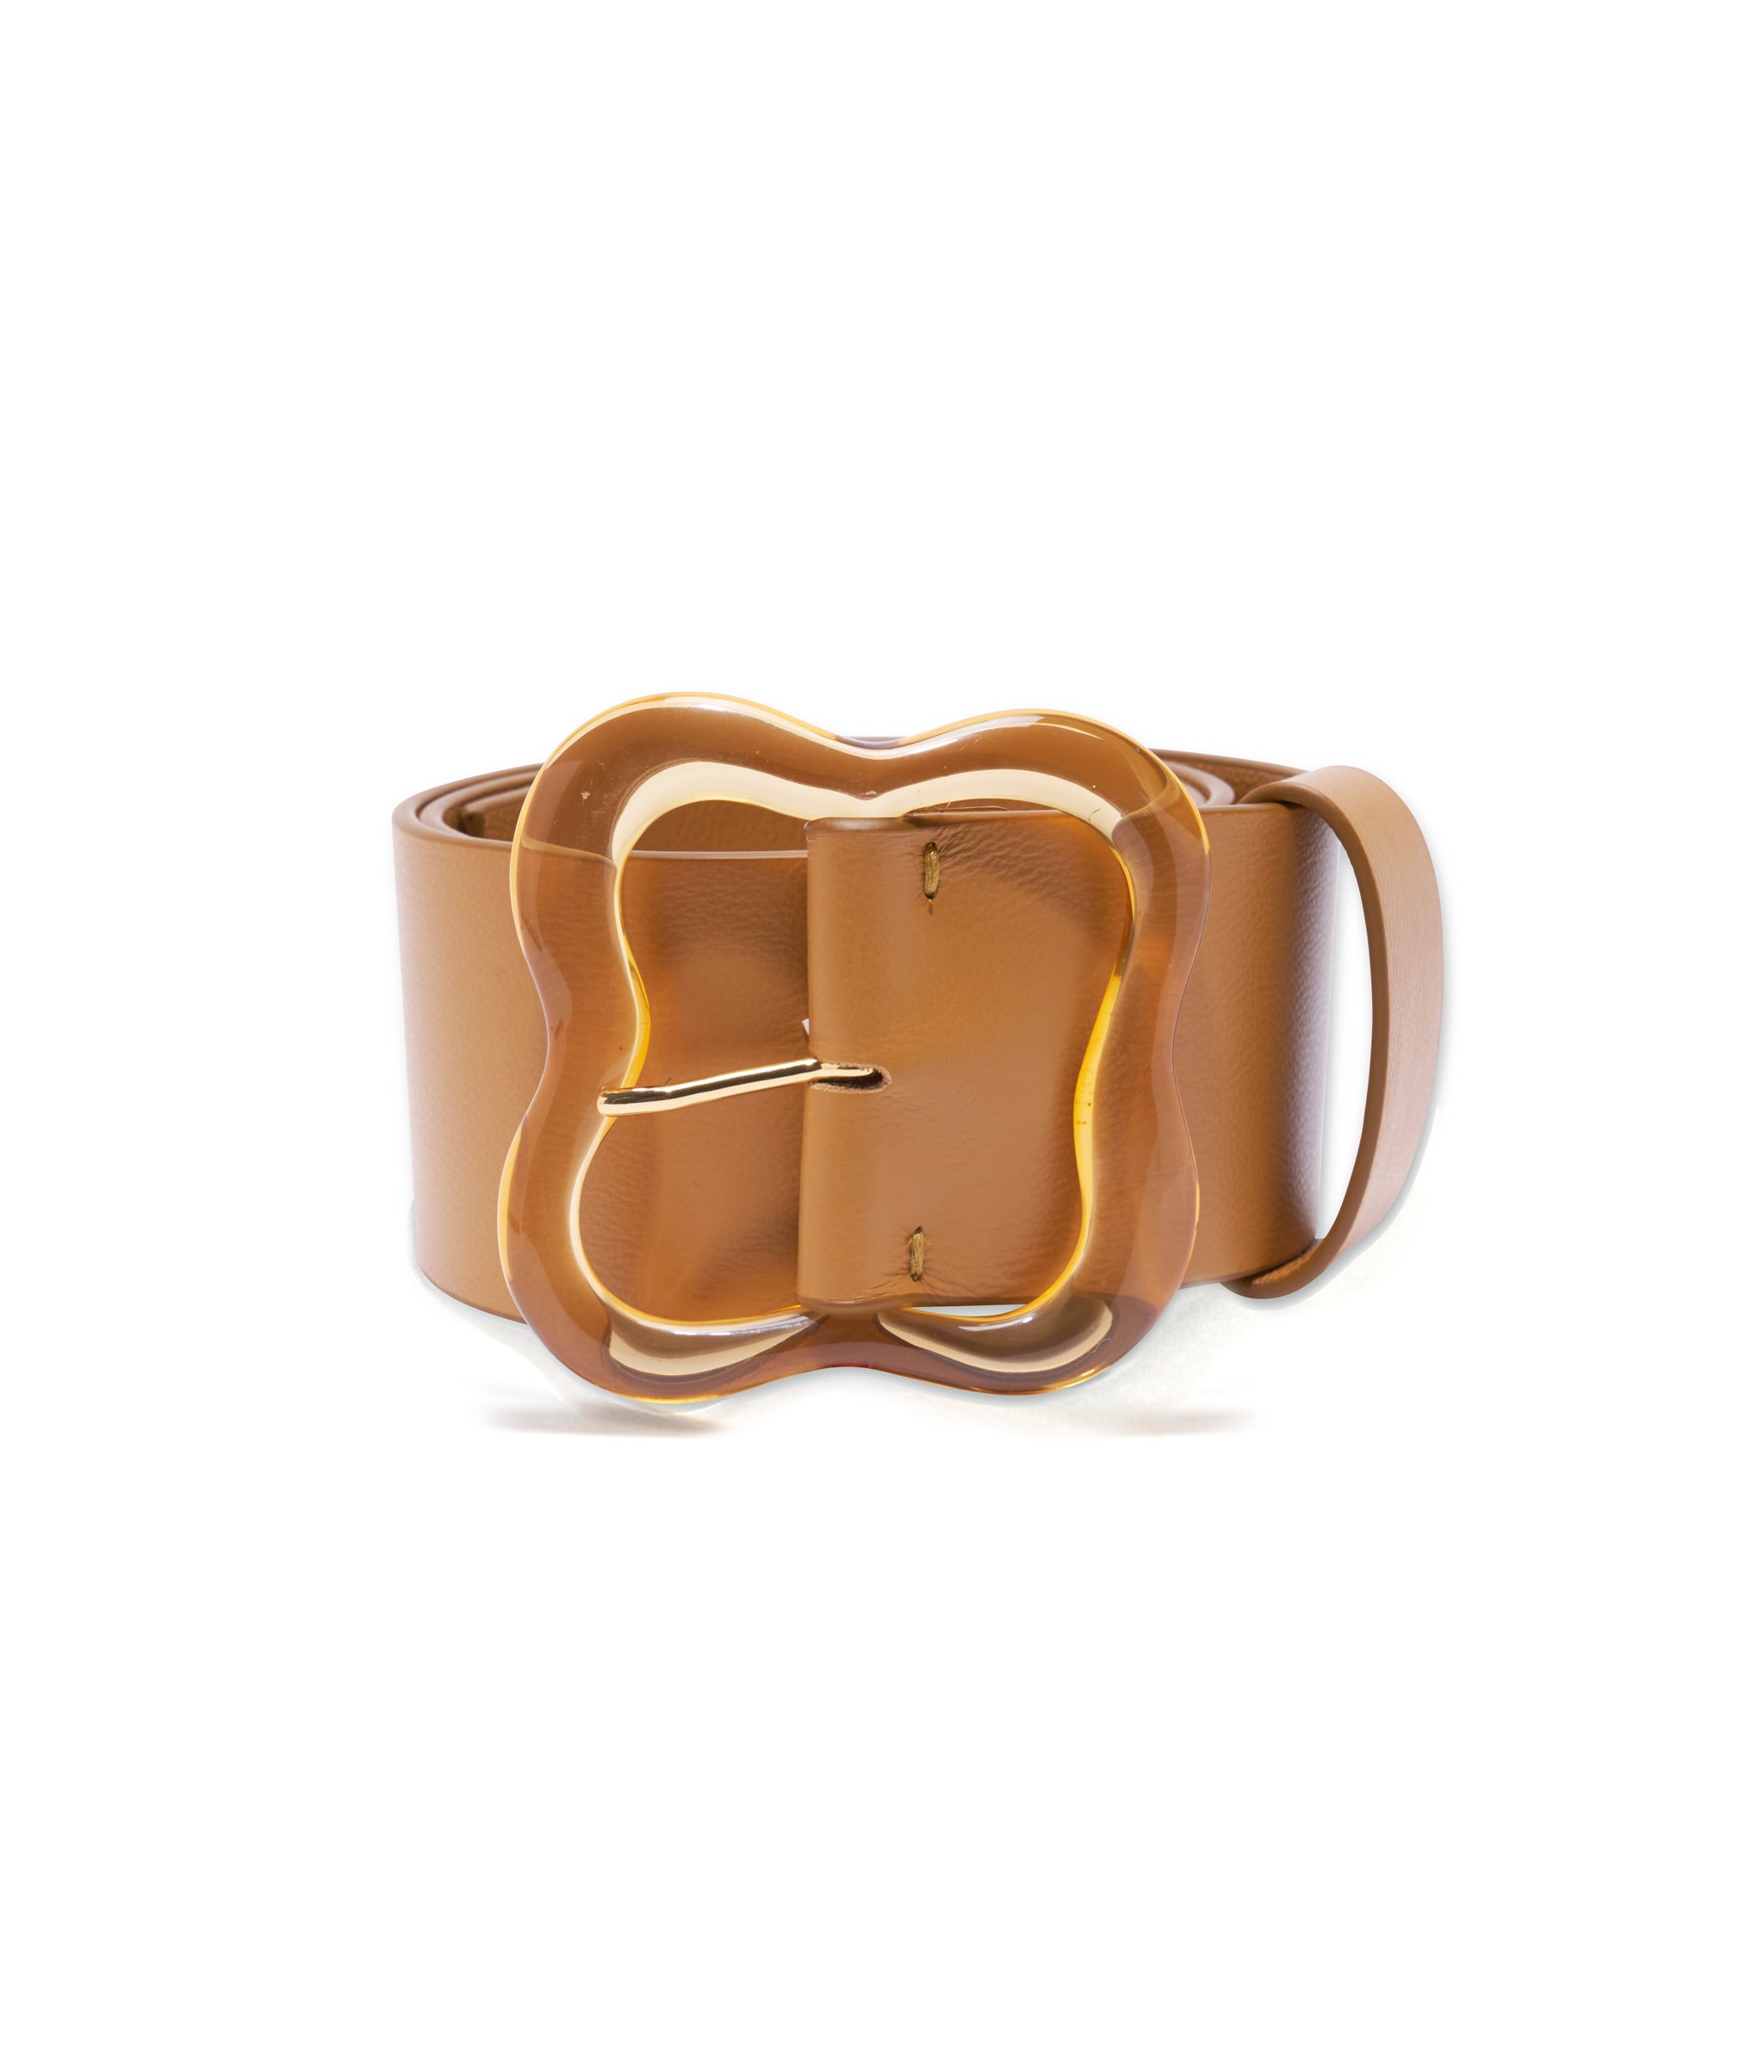 Florence Belt in Amber. Wide amber brown leather belt with honey-colored resin clover buckle.